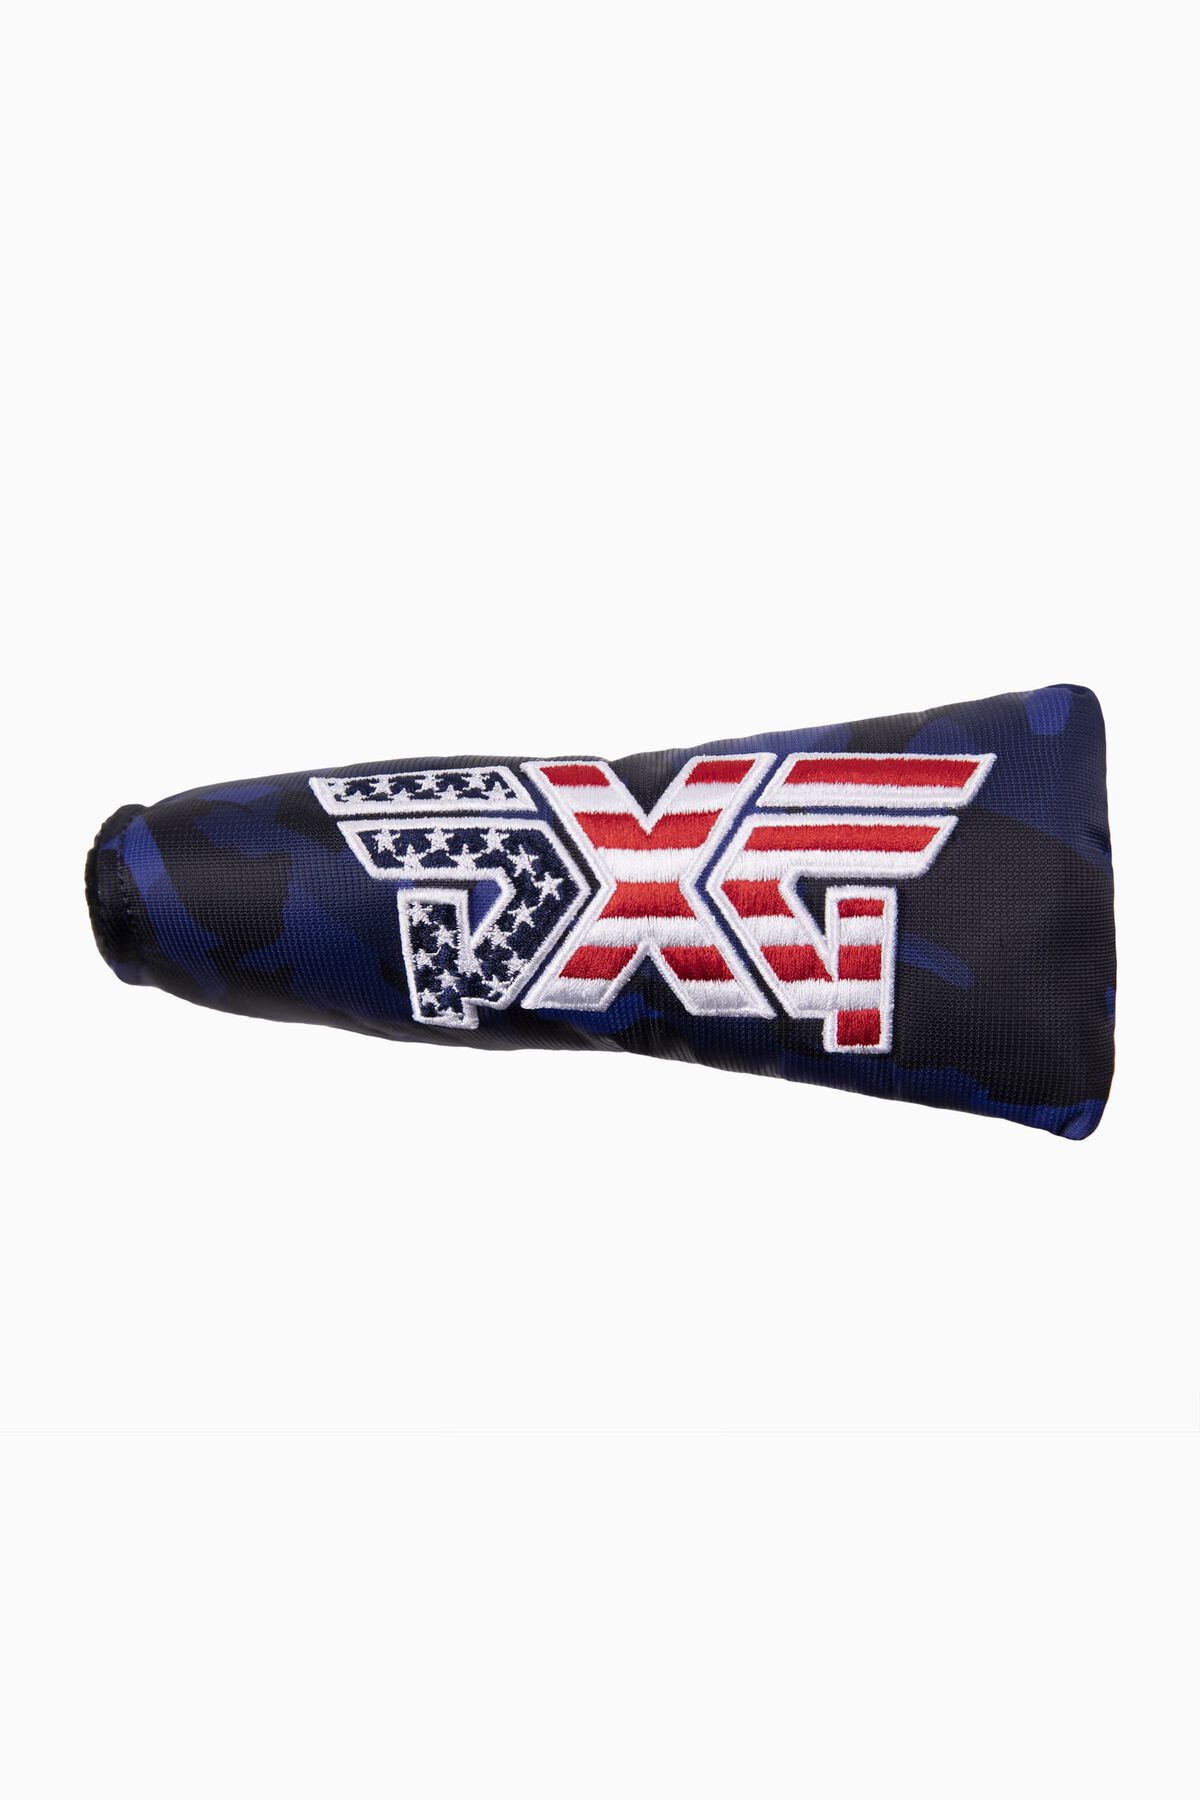 Stars & Stripes Blade Putter Headcover 